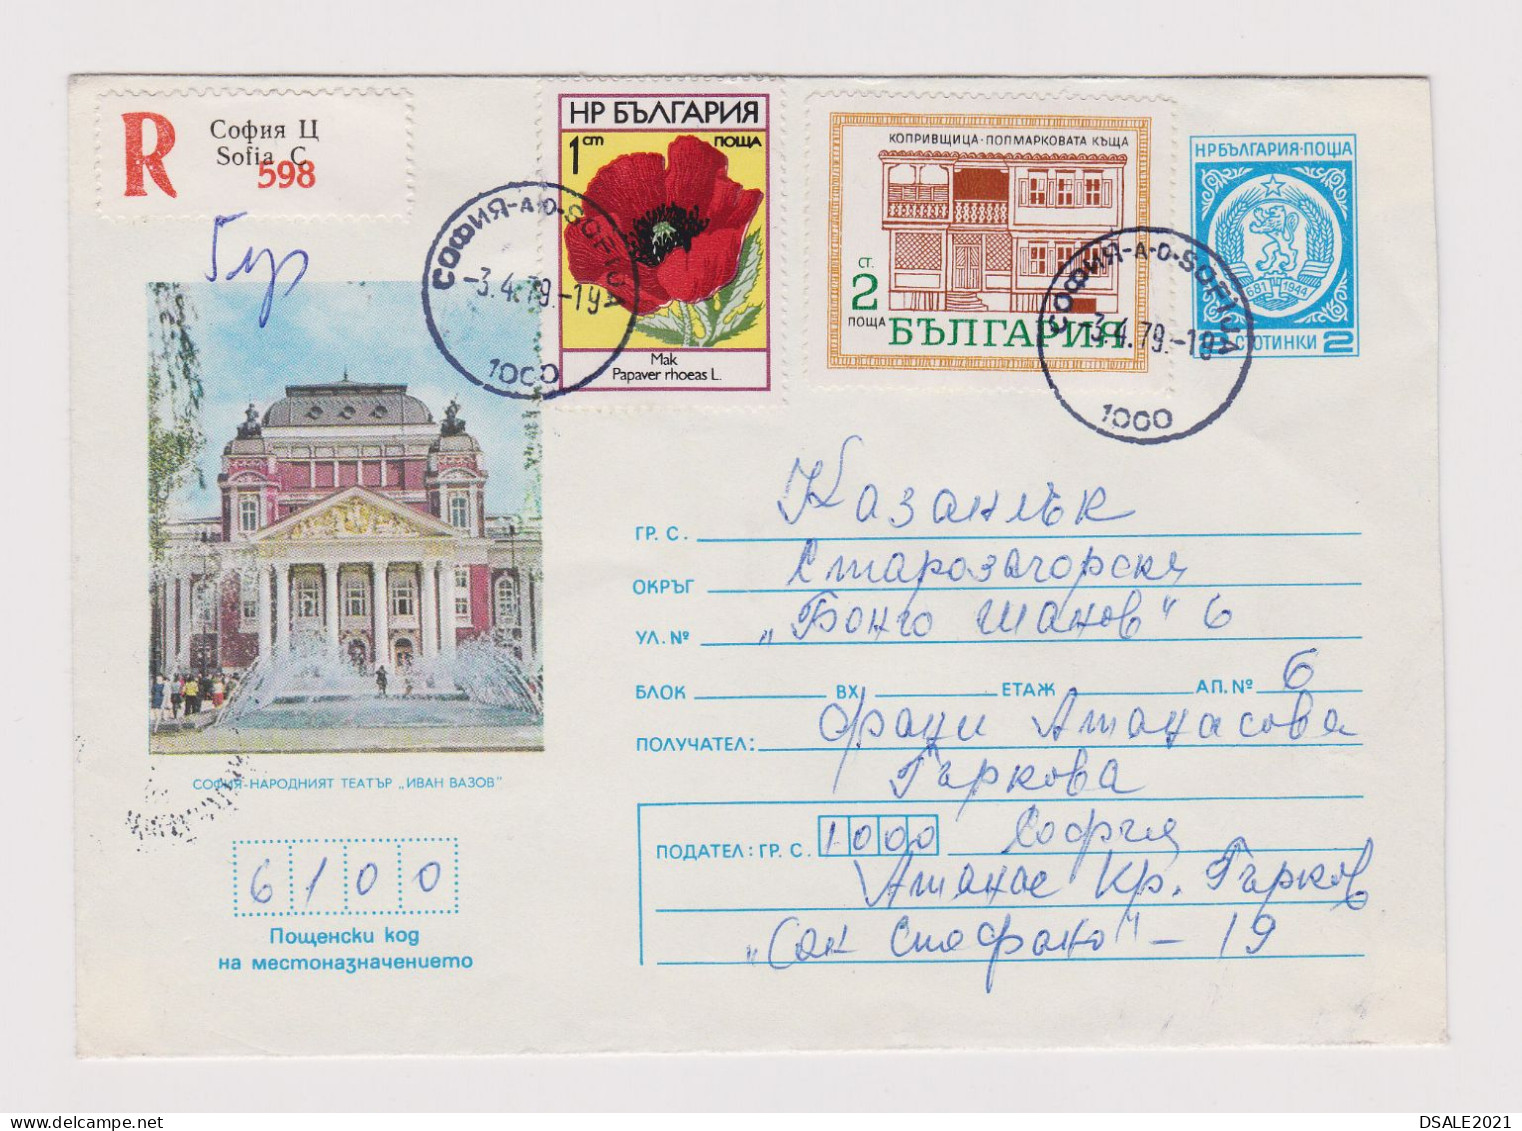 Bulgaria Bulgarien 1979 Ganzsachen R-Brief, Postal Stationery Cover, Registered W/Topic Stamps Flower, Architecture /857 - Enveloppes